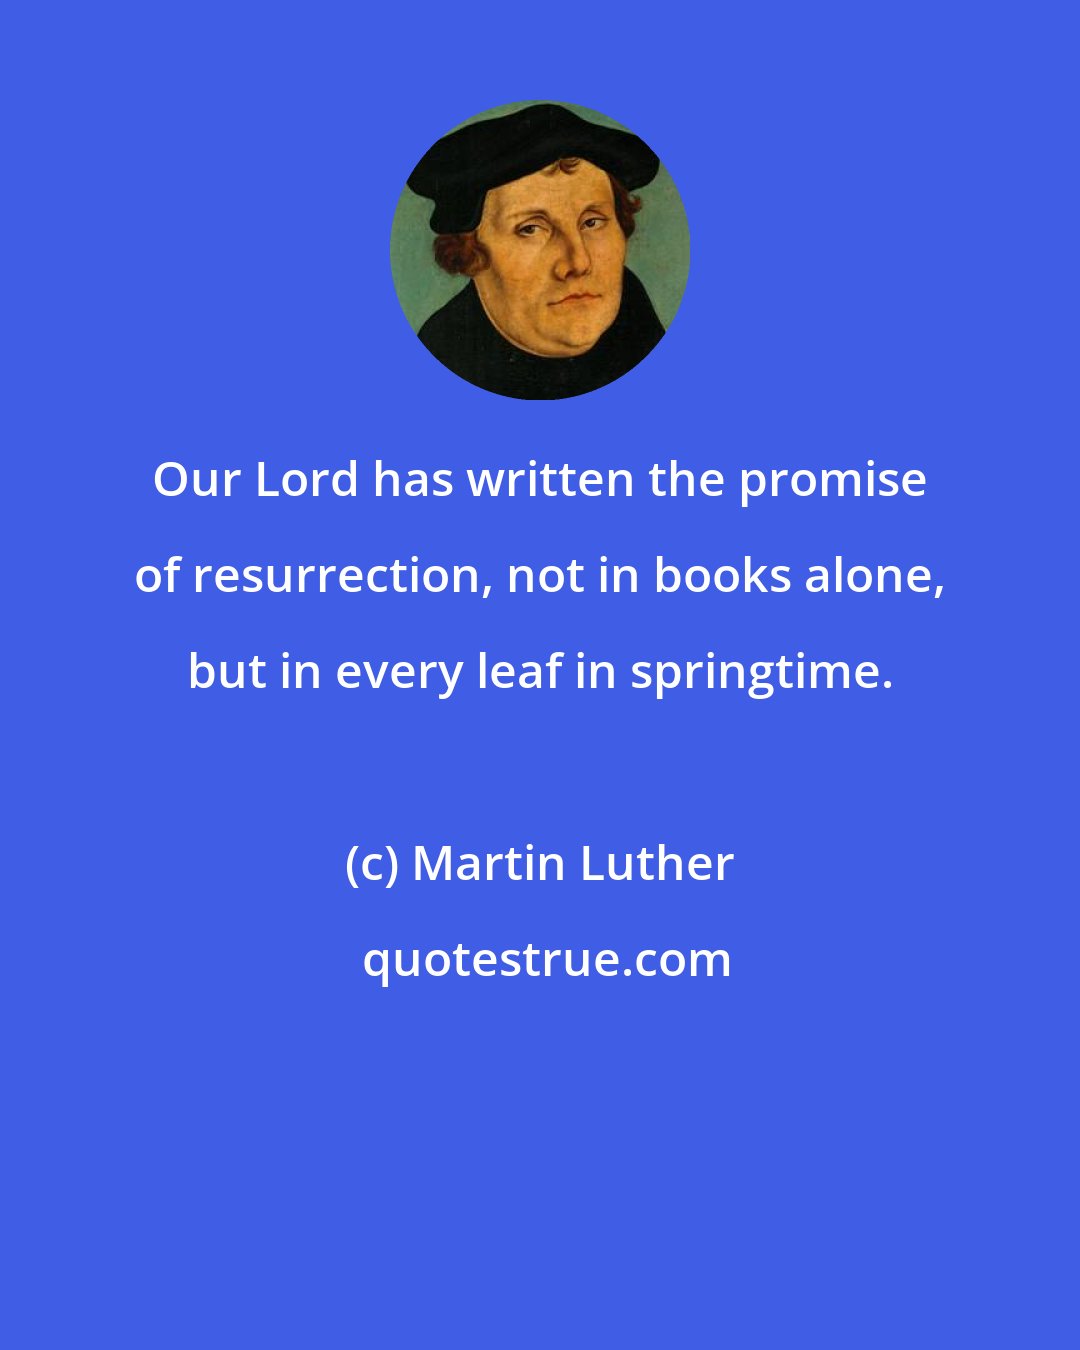 Martin Luther: Our Lord has written the promise of resurrection, not in books alone, but in every leaf in springtime.